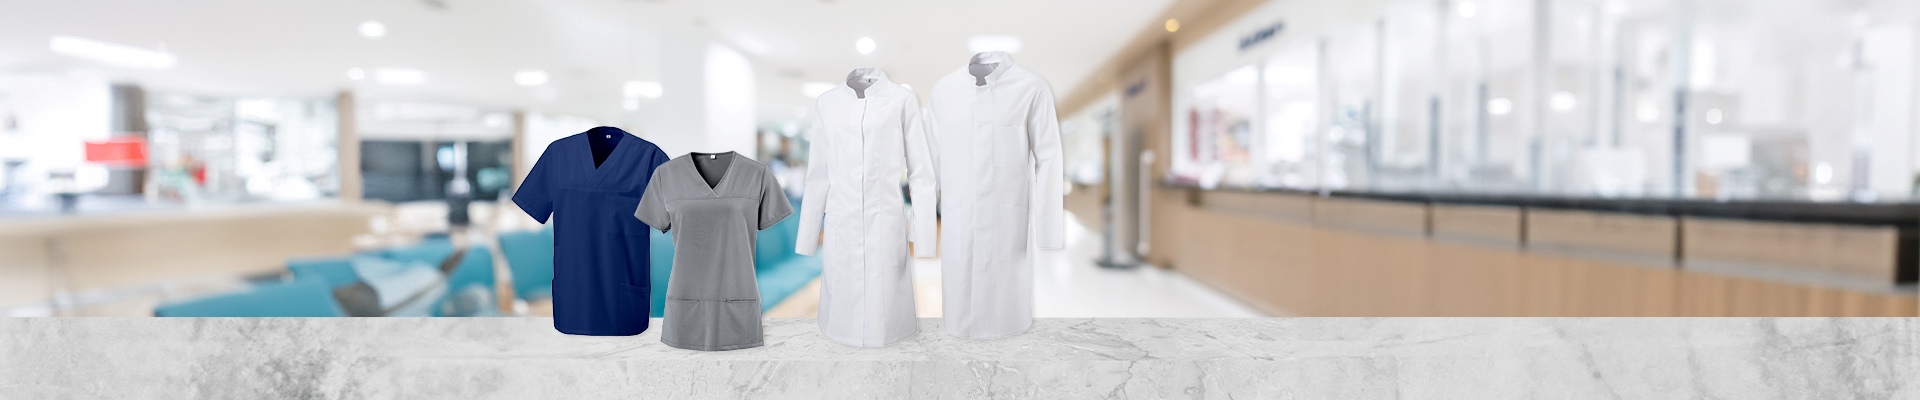 Order our sample set of professional clothing items that you can supply to medical and health facilities!